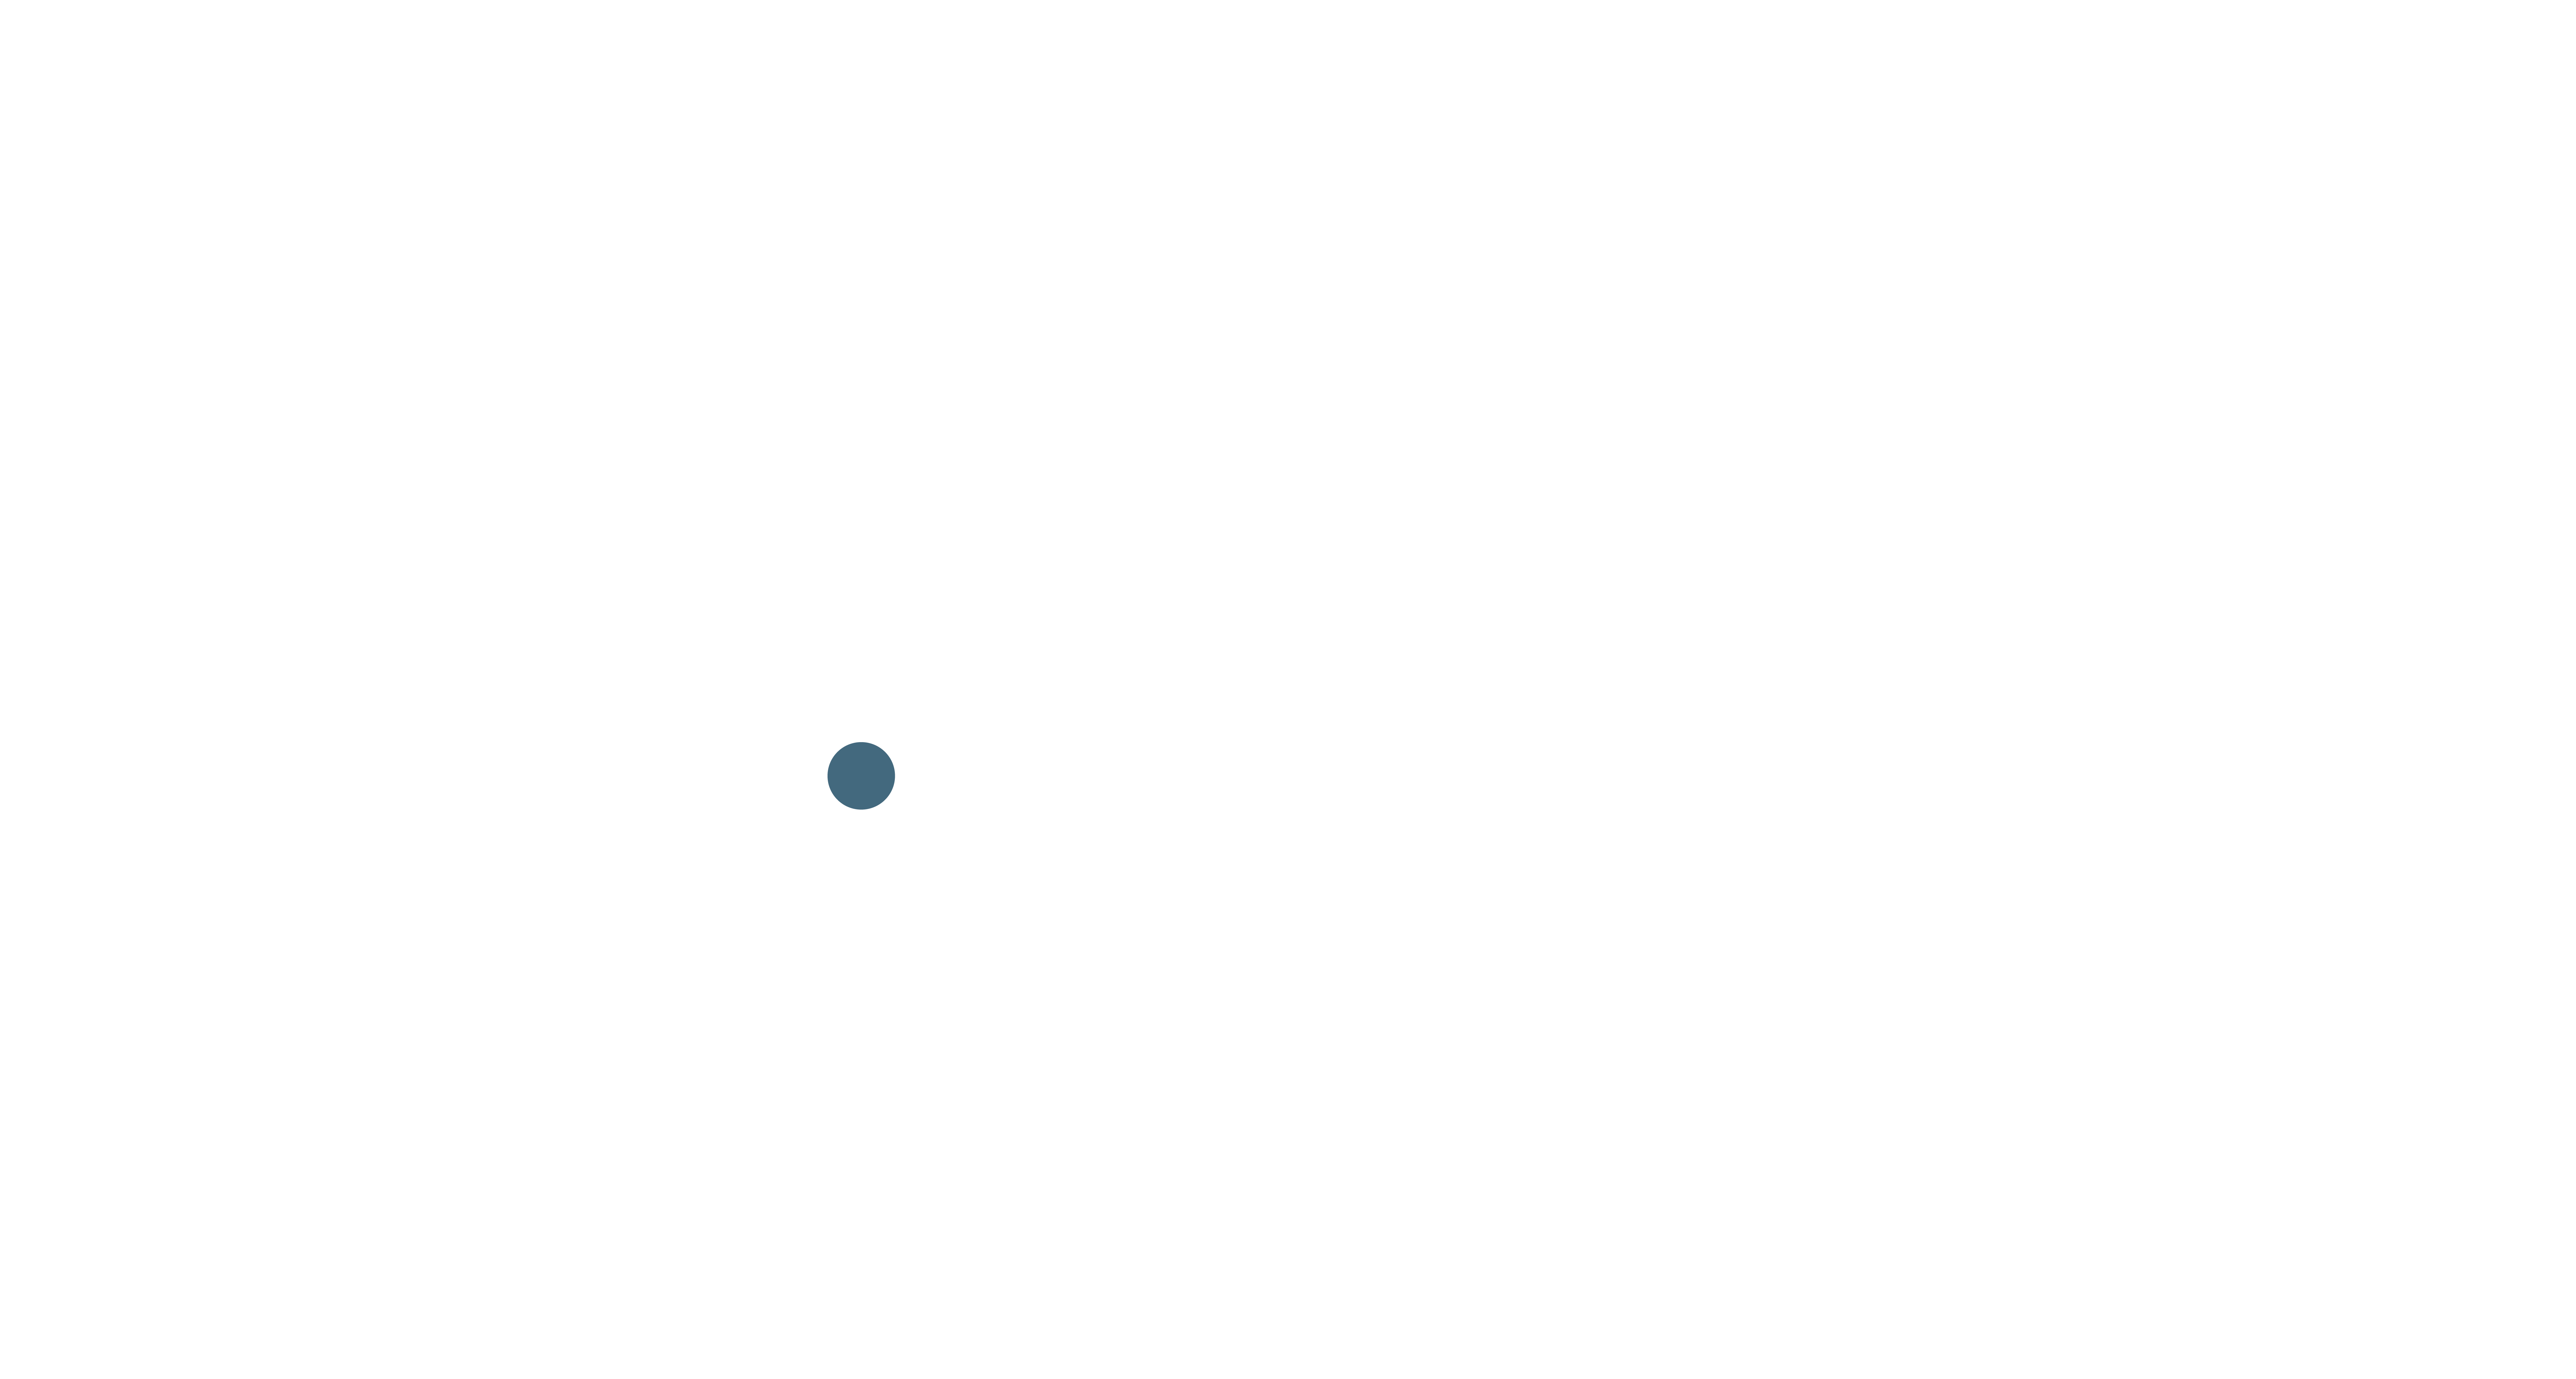 https://usercontent.one/wp/www.riedlco.dk/wp-content/uploads/2021/08/logo-stort.png